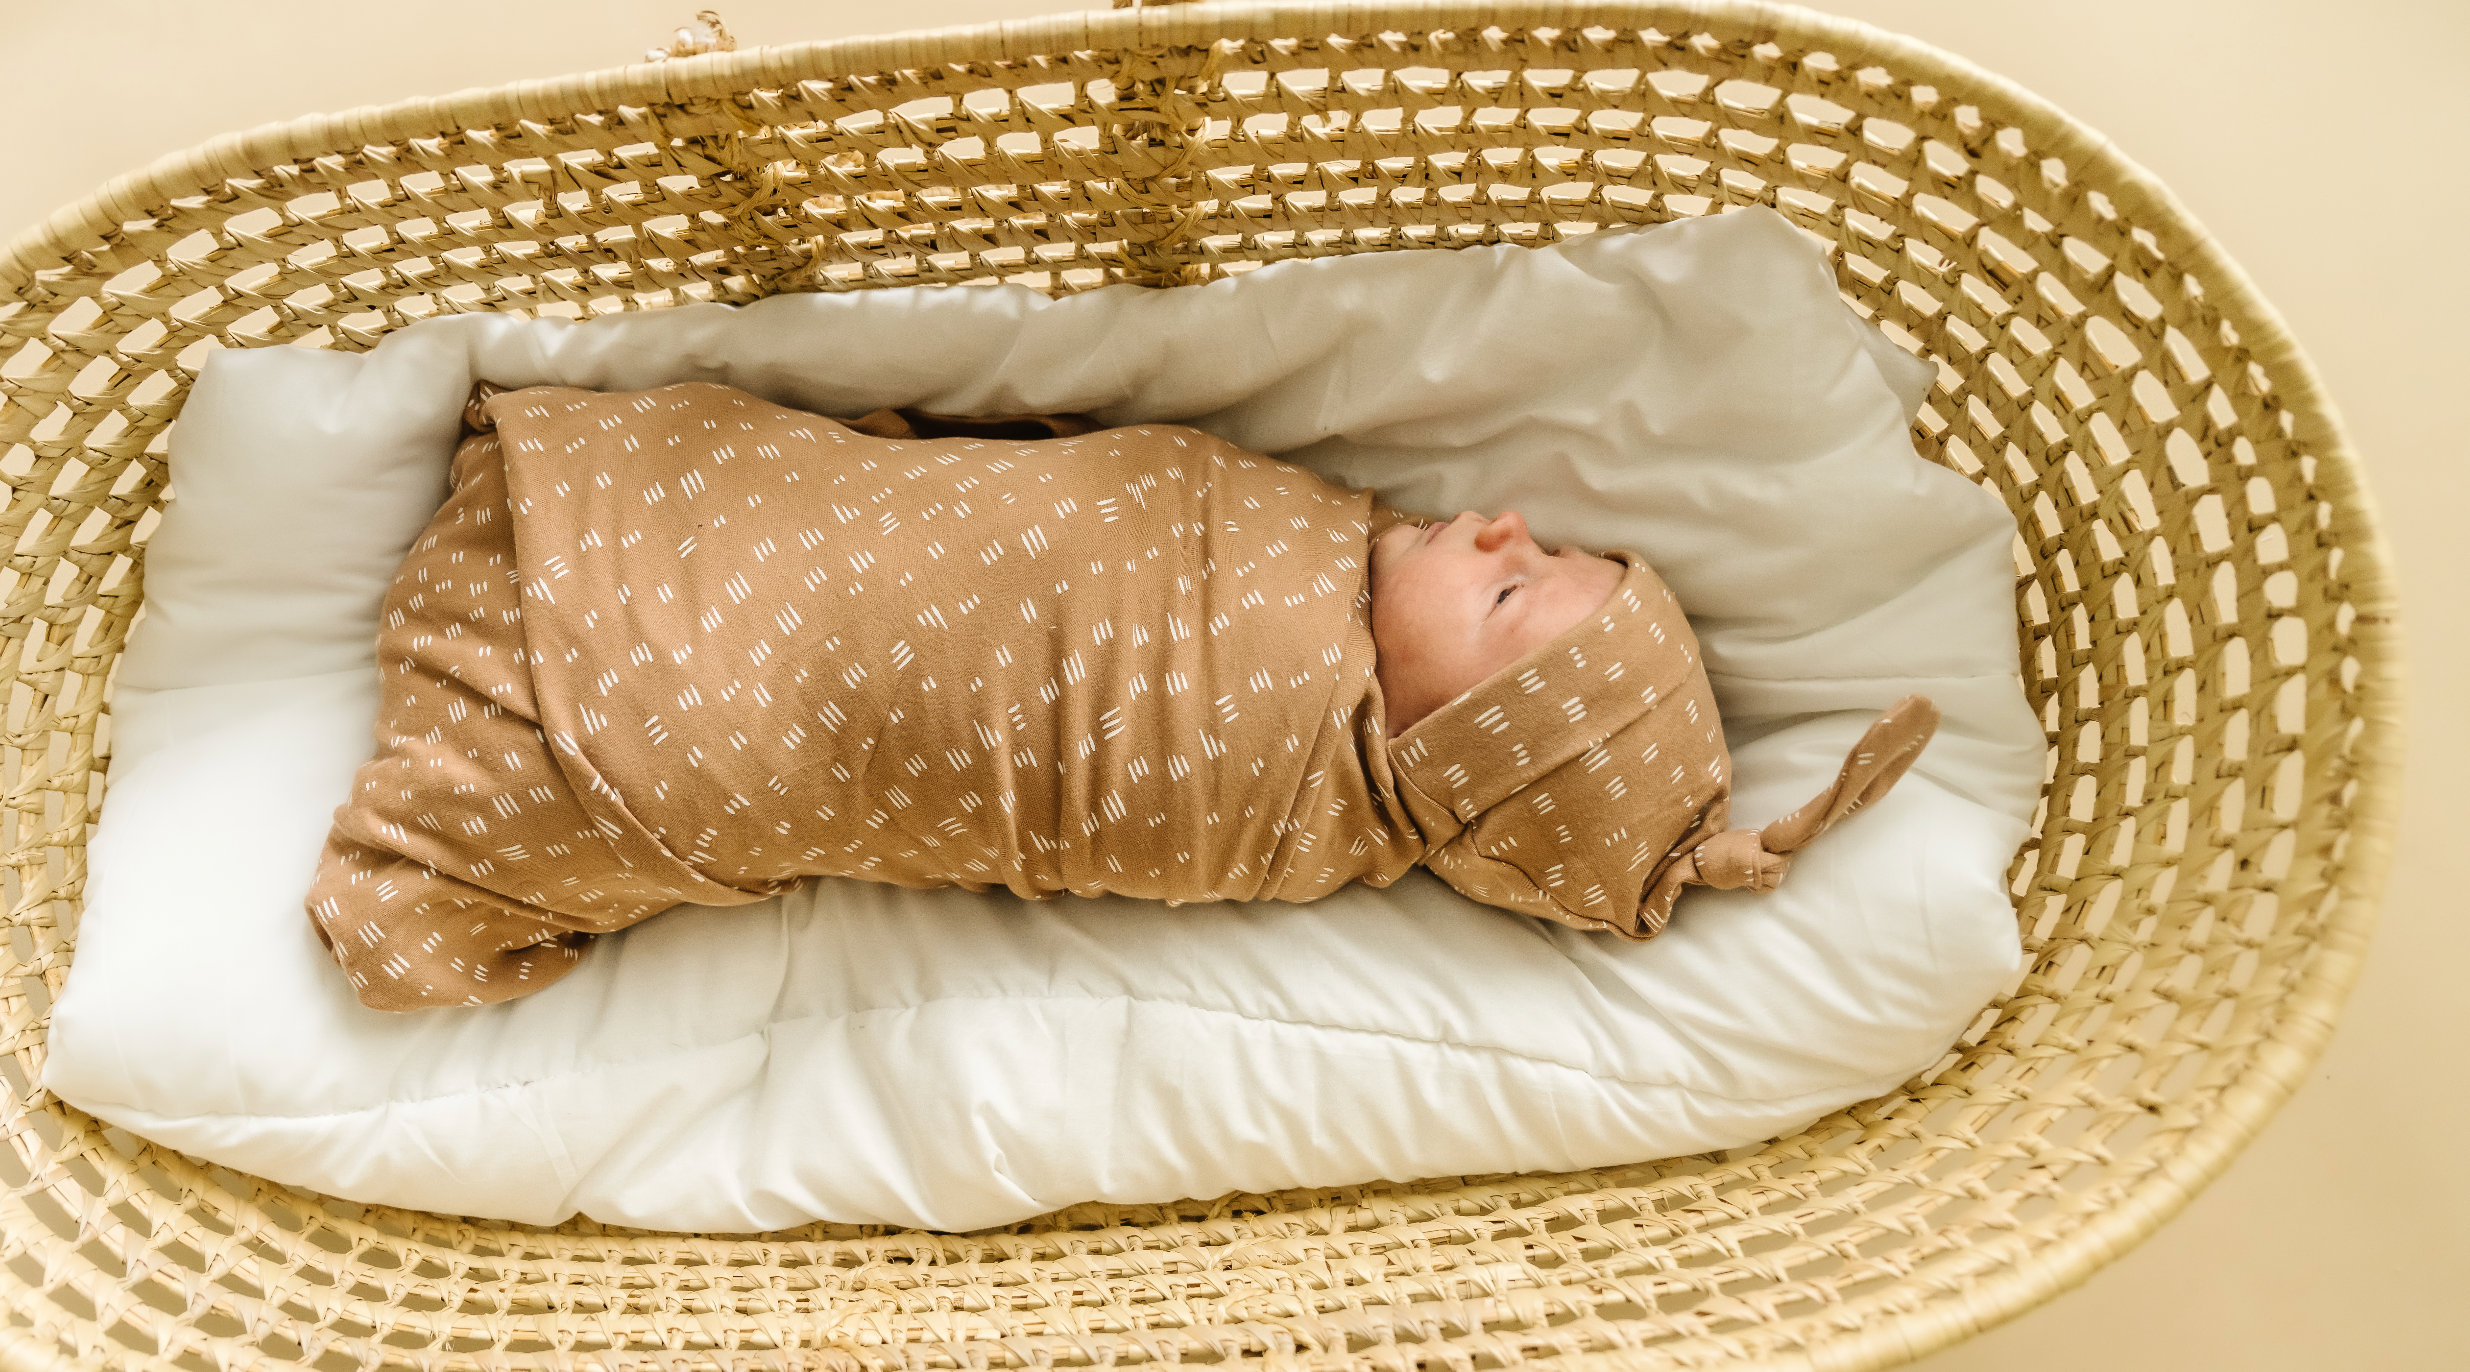 Tips for making your baby's clothes last longer